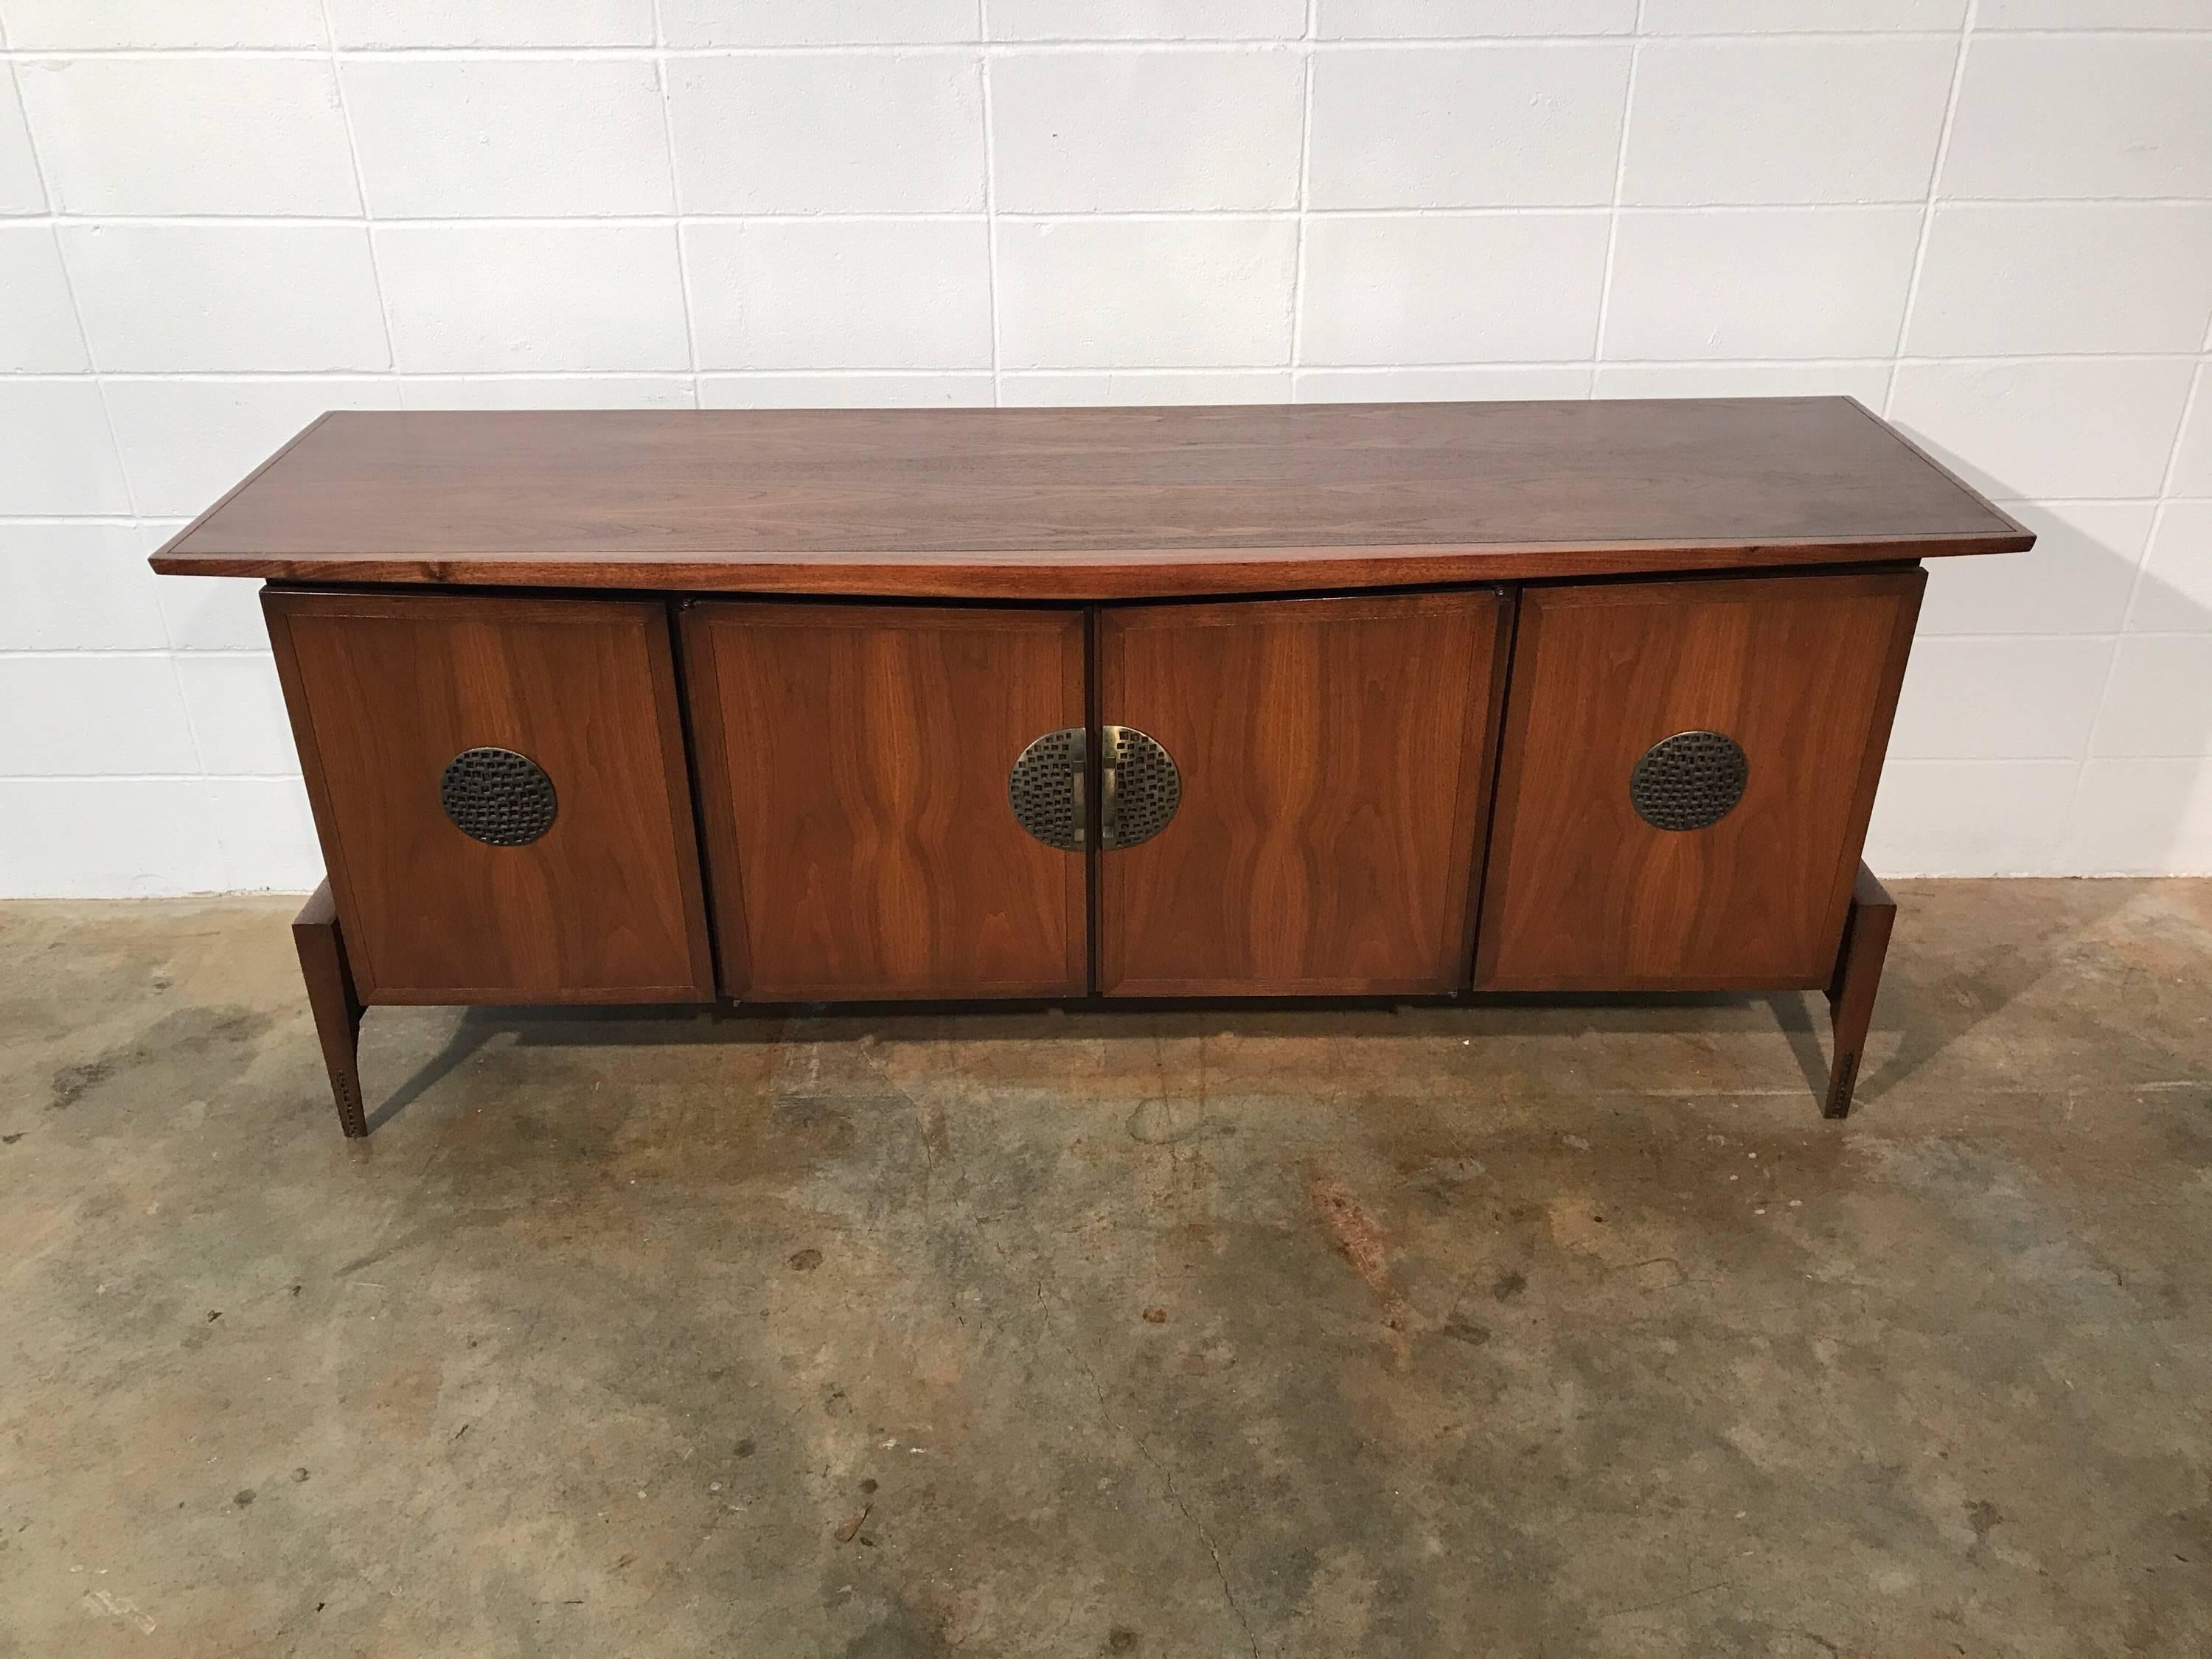 Sophisticated Mid-Century Modern credenza Asian flair - Hobey Helen Baker.
Mid-Century Modern credenza or dresser with clean and sleek lines yet unusually refined and sophisticated. Resting on a base with external legs its contains nine drawers